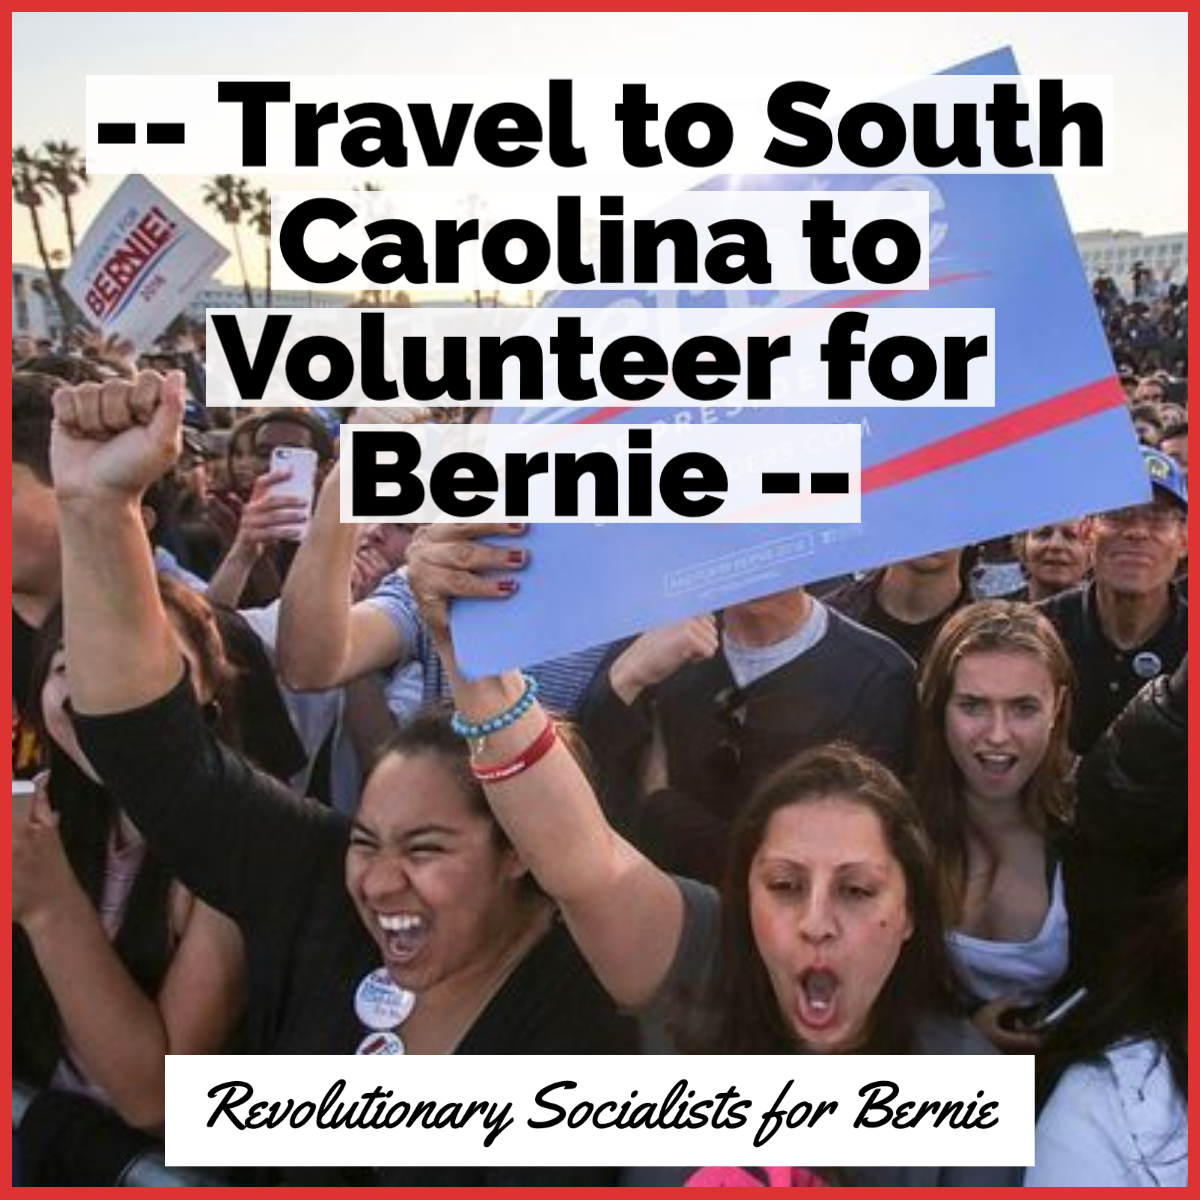 Travel from Chicago to South Carolina to volunteer for Bernie